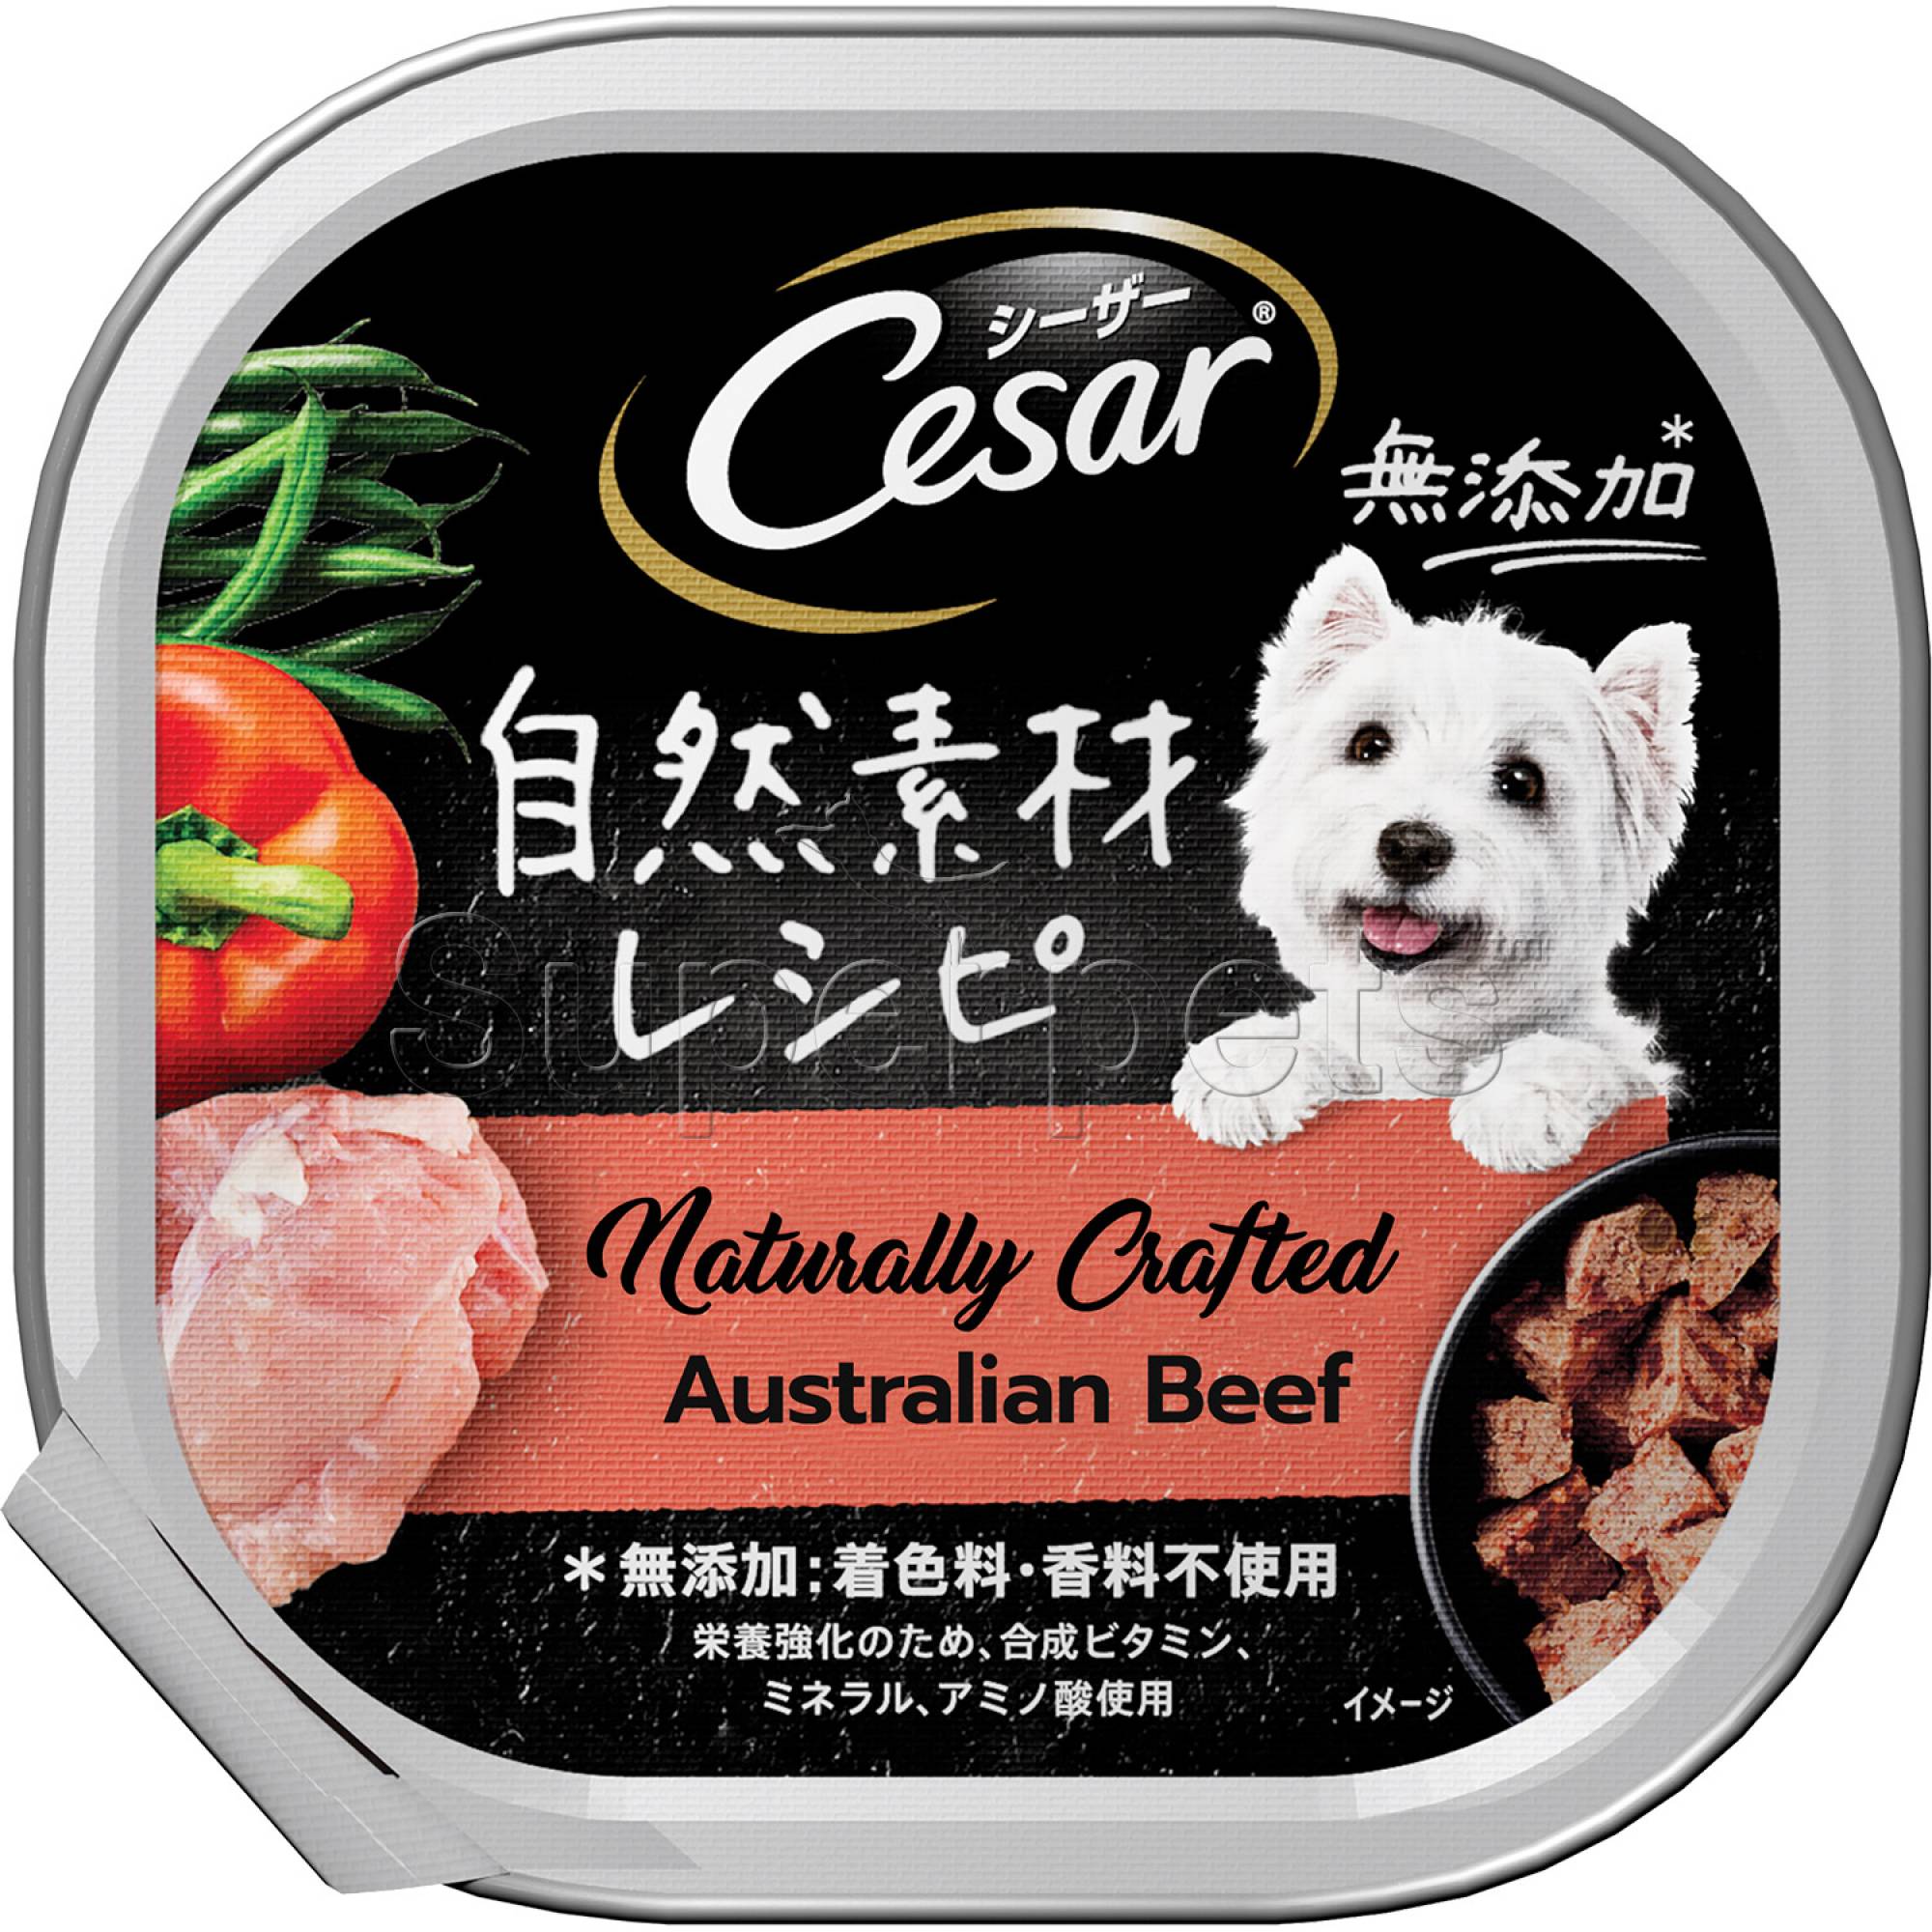 Cesar - Naturally Crafted Australian Beef 85g